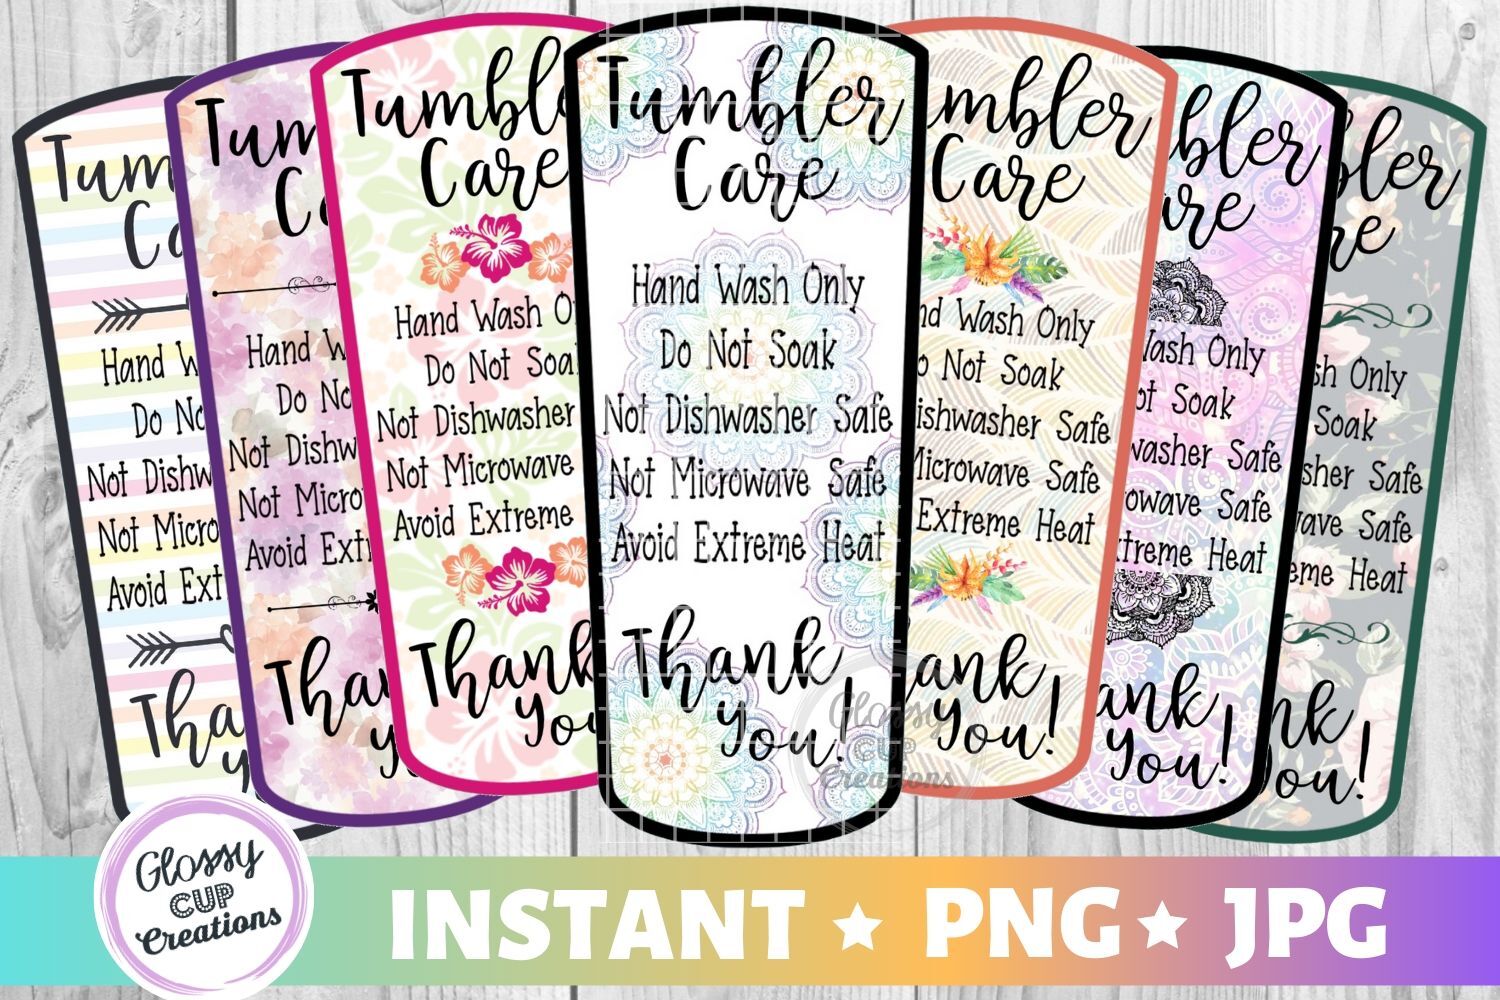 medium-tumbler-care-card-pack-png-print-and-cut-7-designs-by-glossy